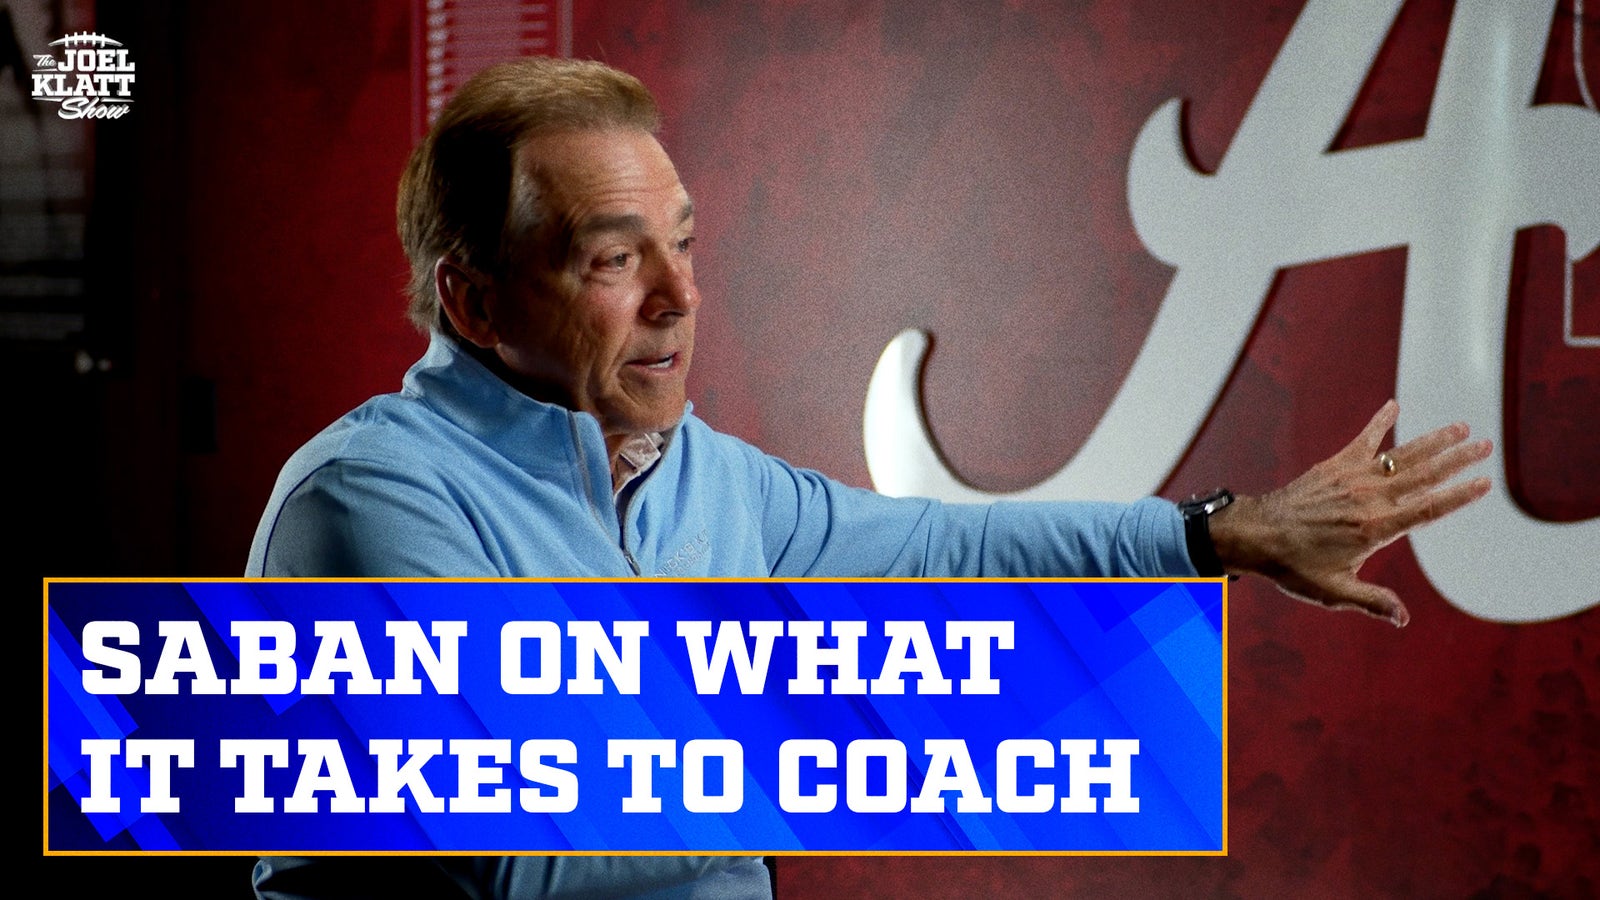 Nick Saban shares thoughts on the recruiting process